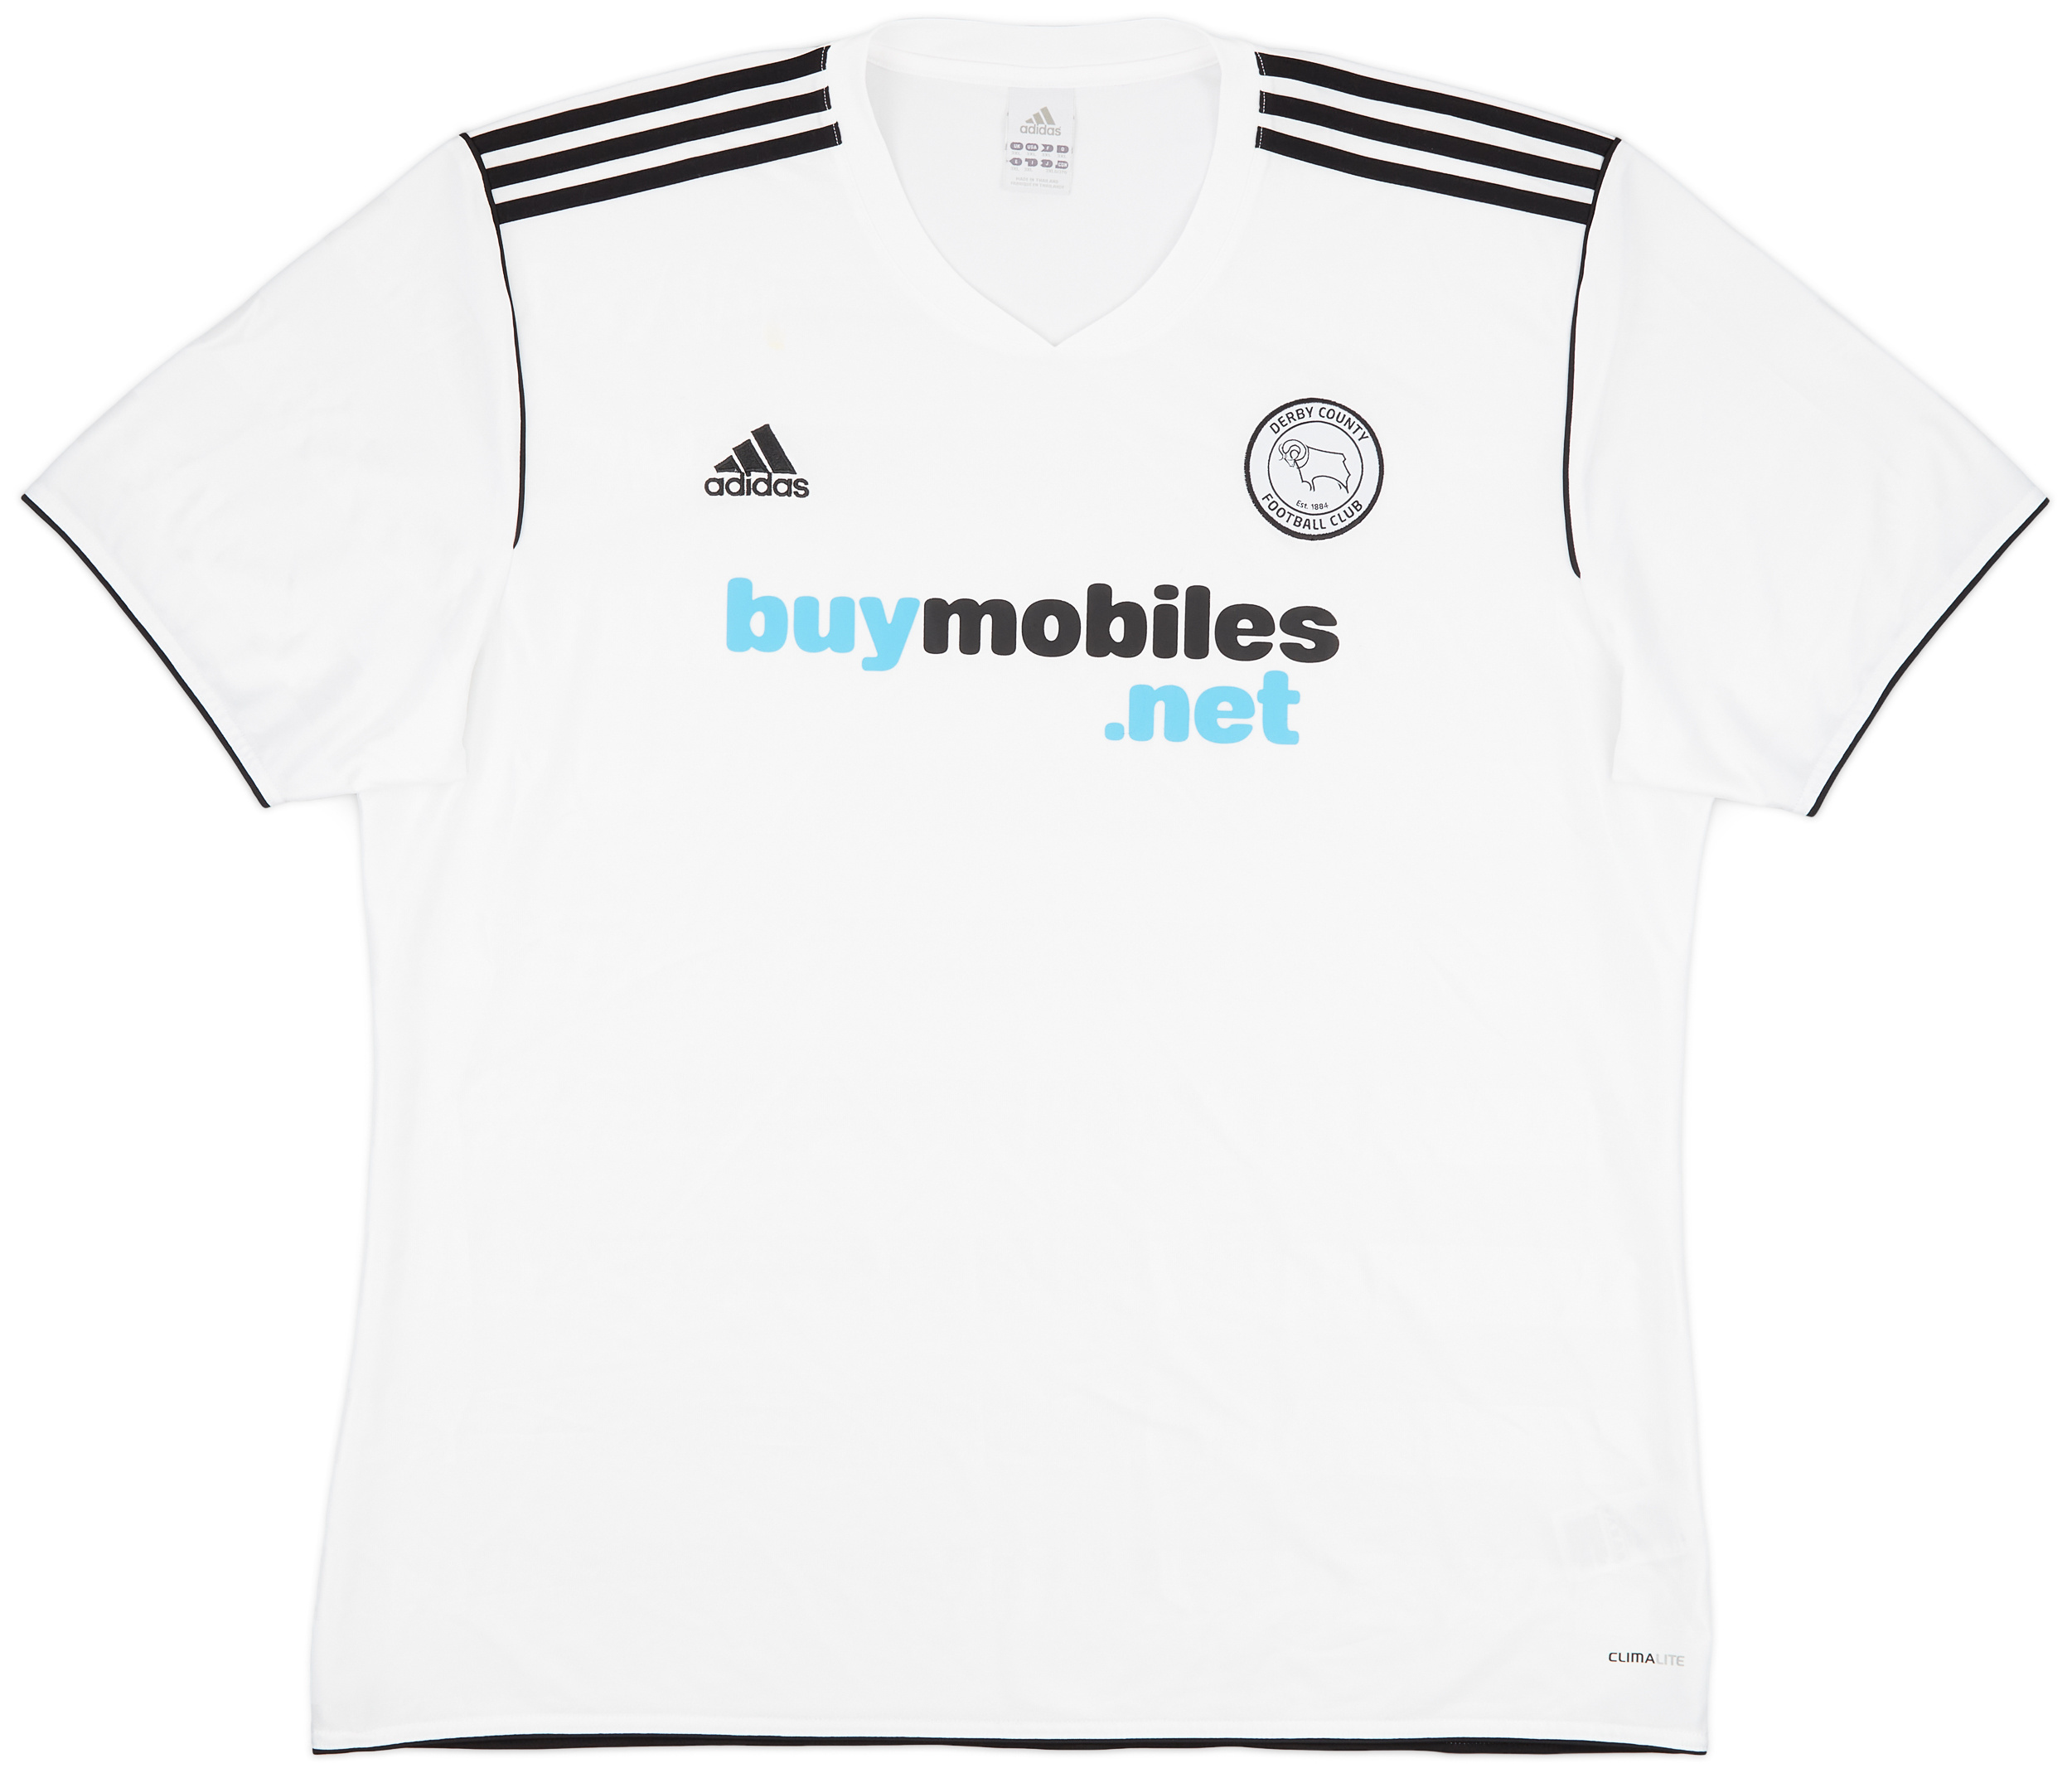 2011-12 Derby County Home Shirt - 9/10 - ()